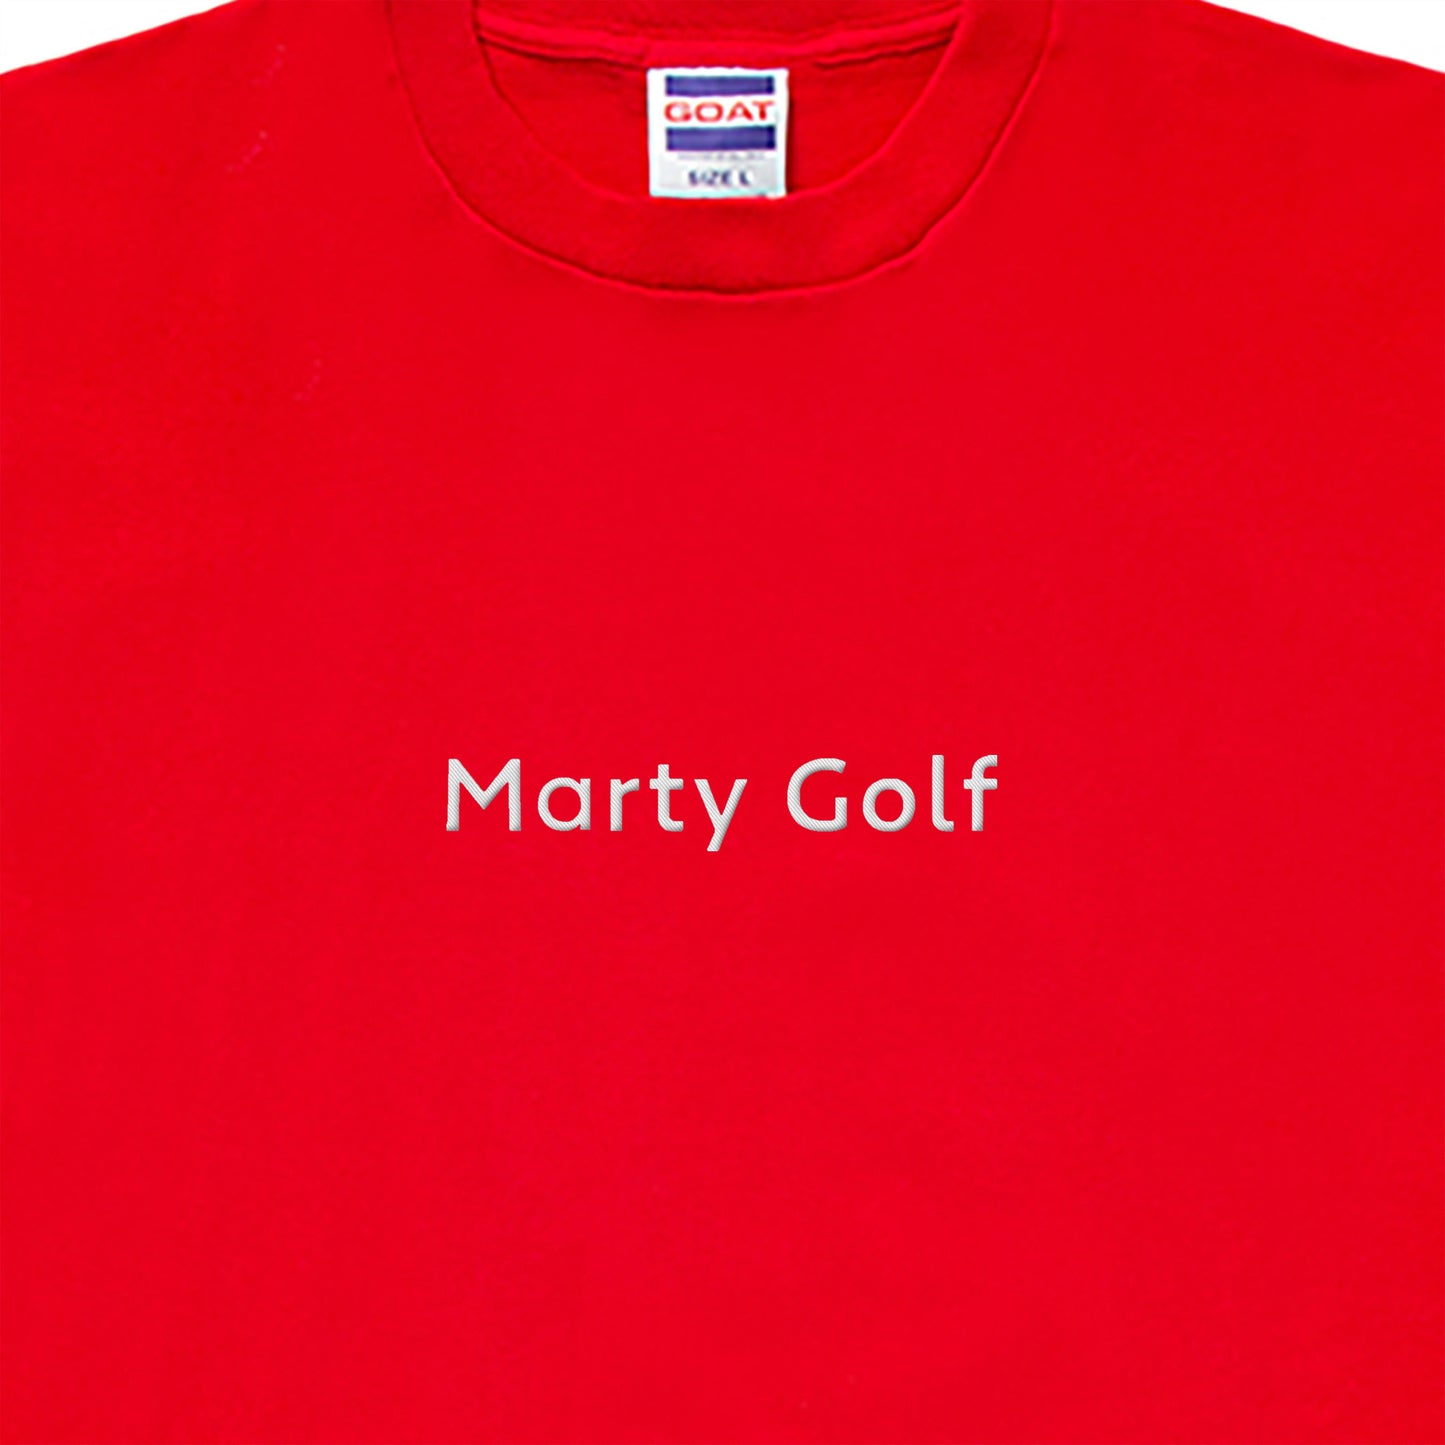 Marty × GOAT T